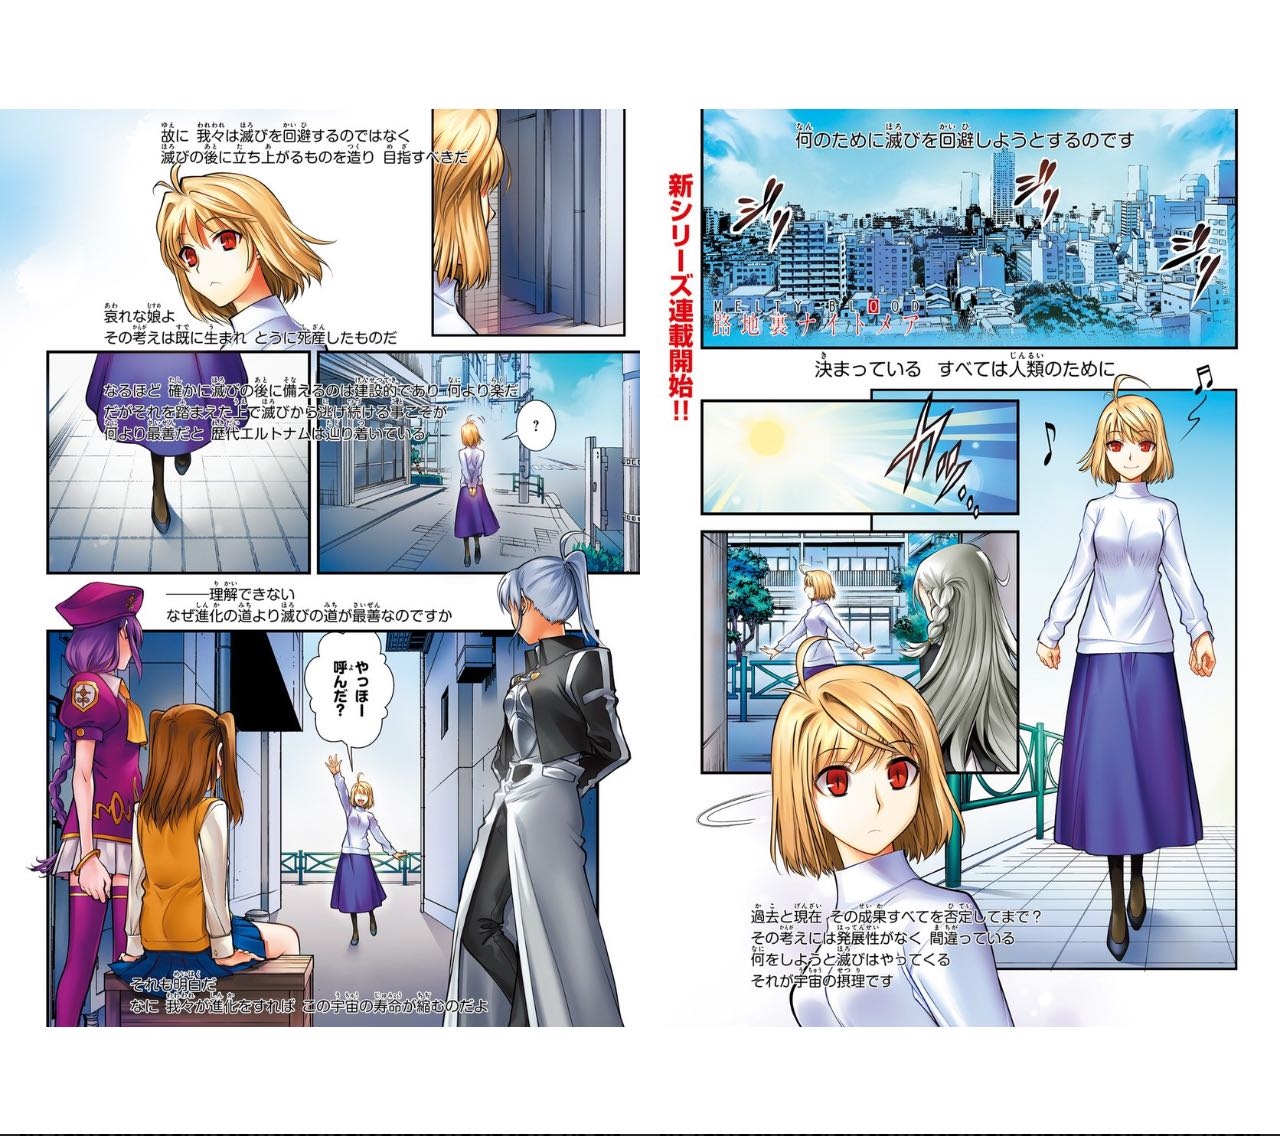 Tsukihime Melty Blood All Around Discussions Forums Myanimelist Net